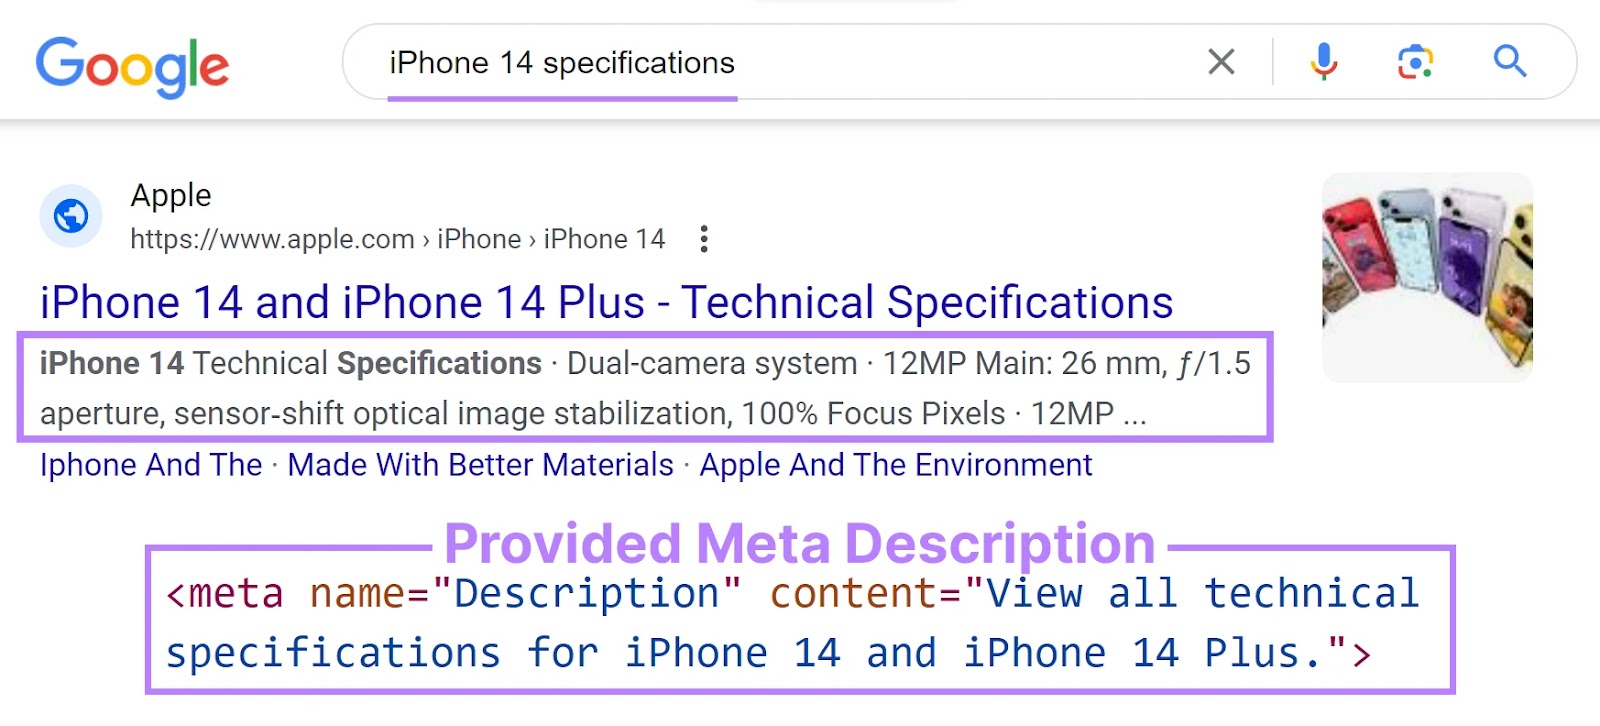 Search engine results page for iphone 14 specifications, highlighting the meta description vs the original provided meta description